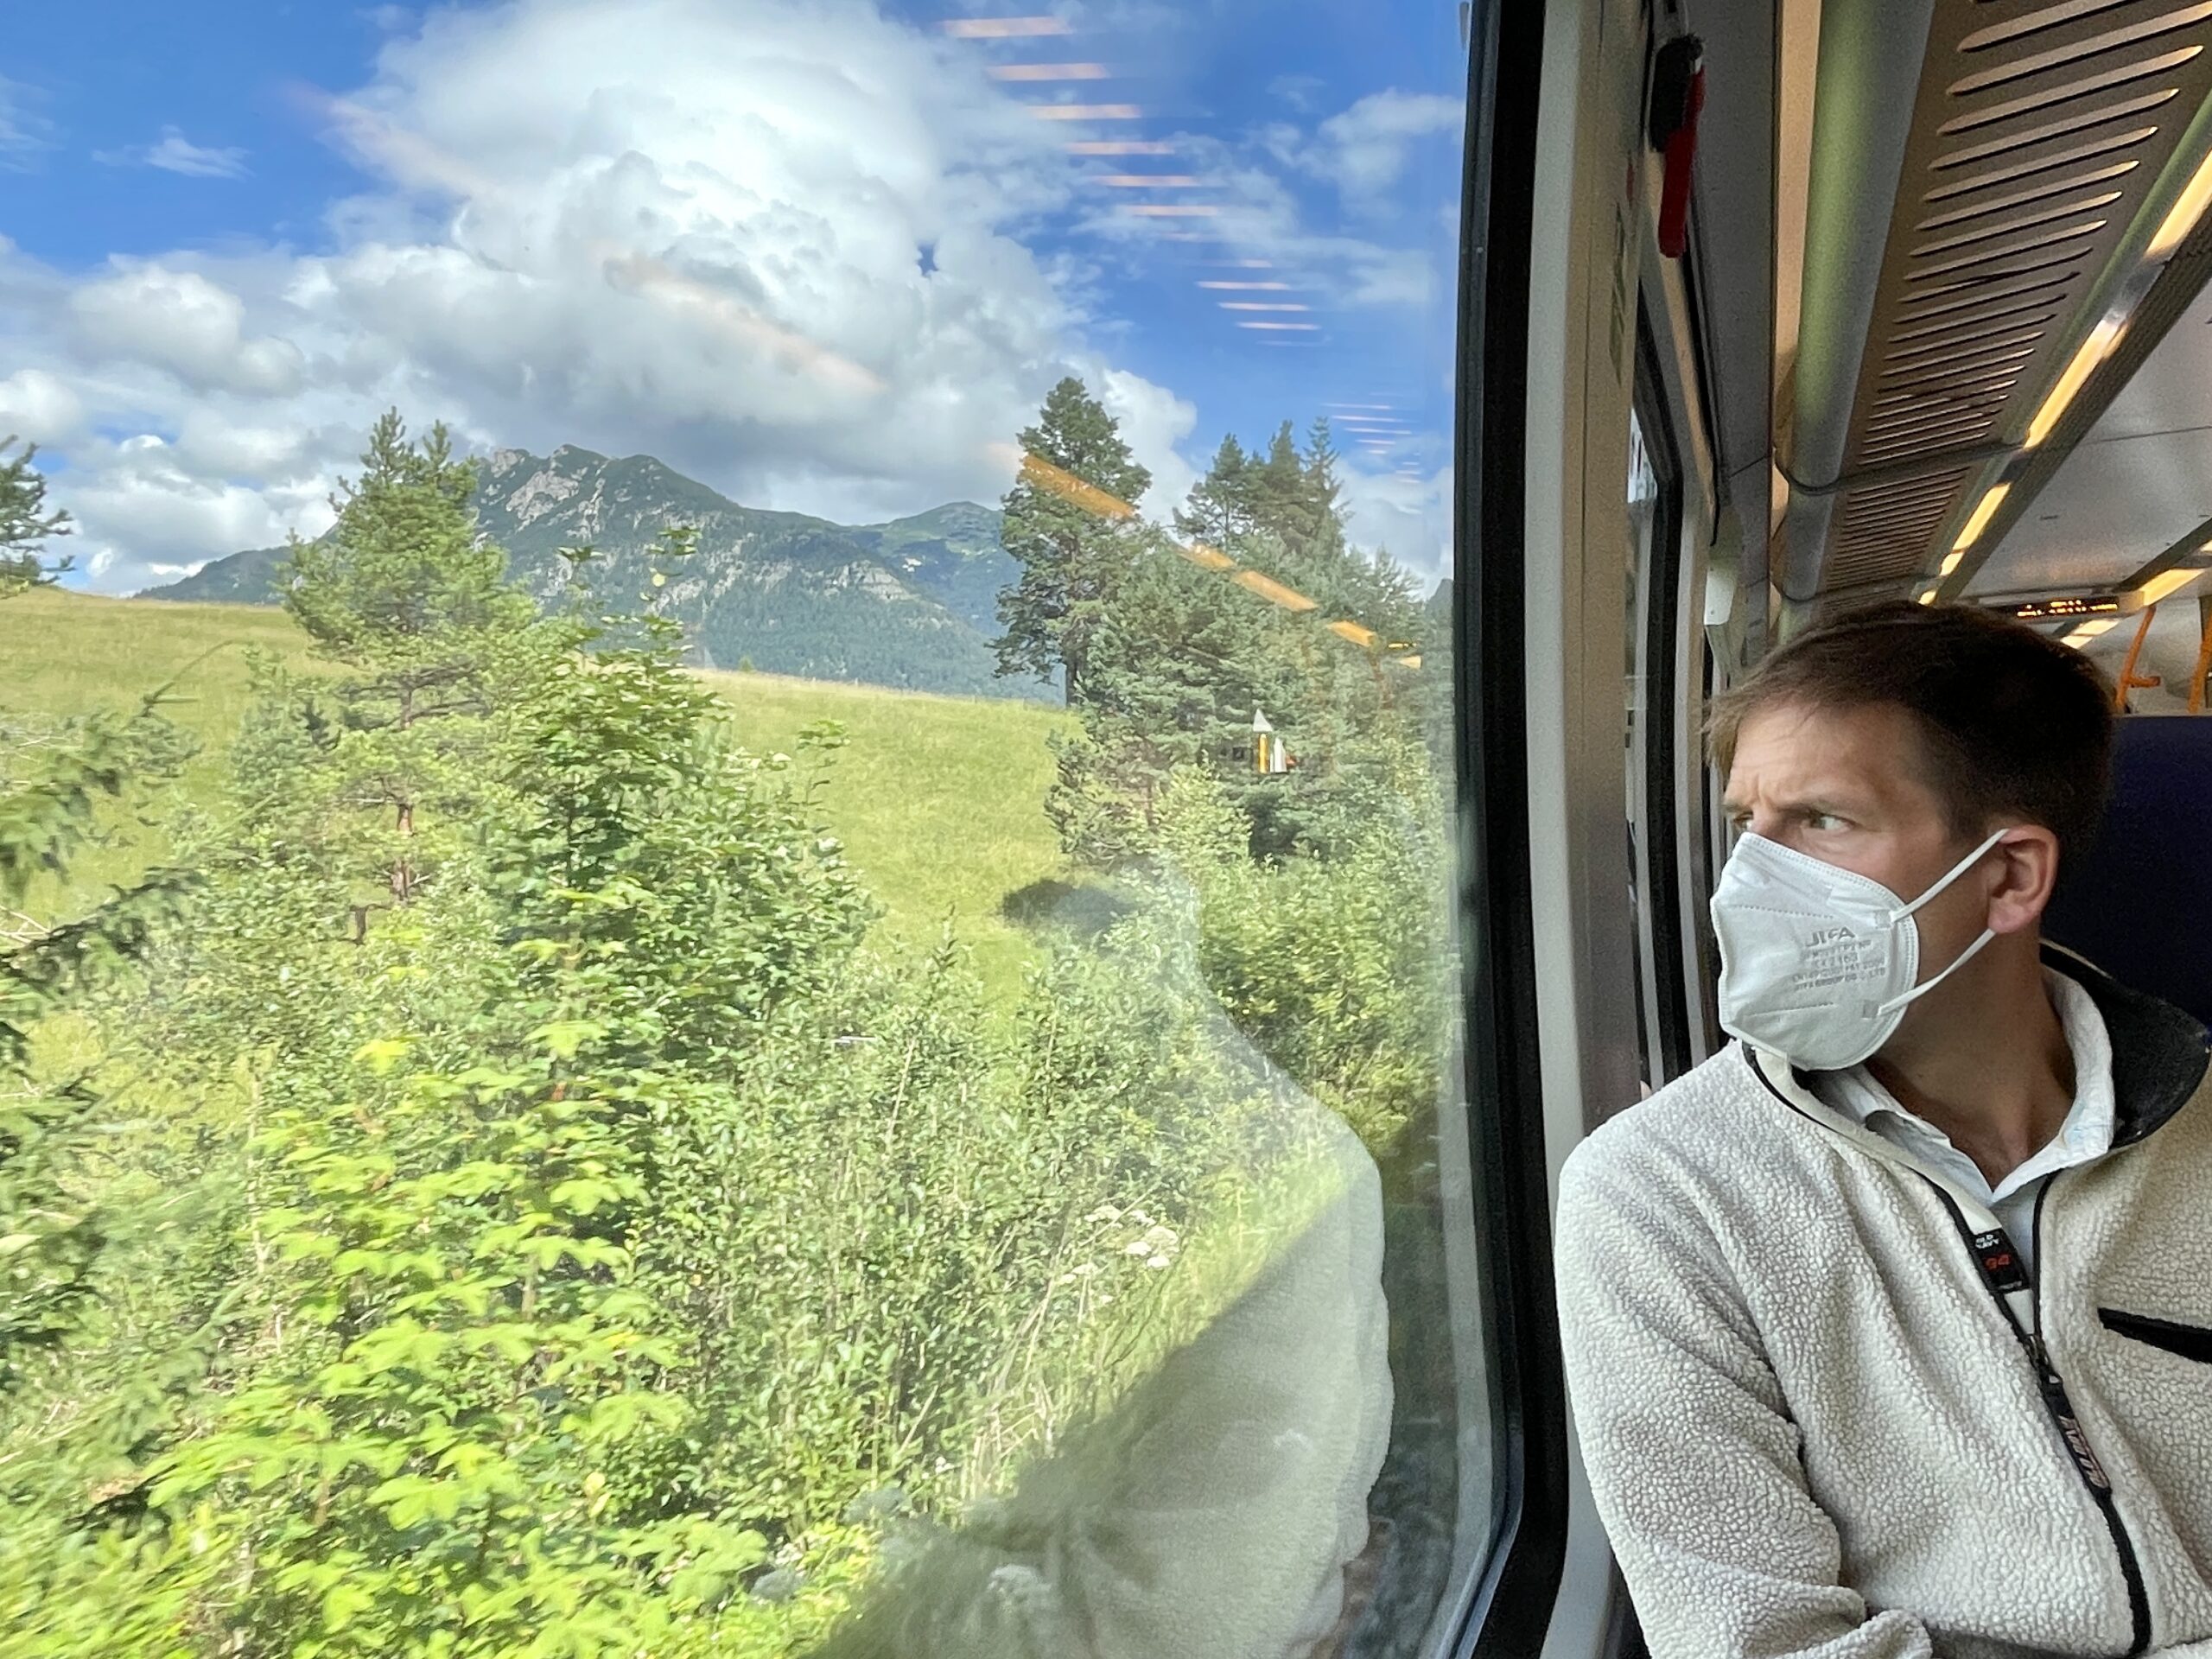 Train travel during Covid with mask